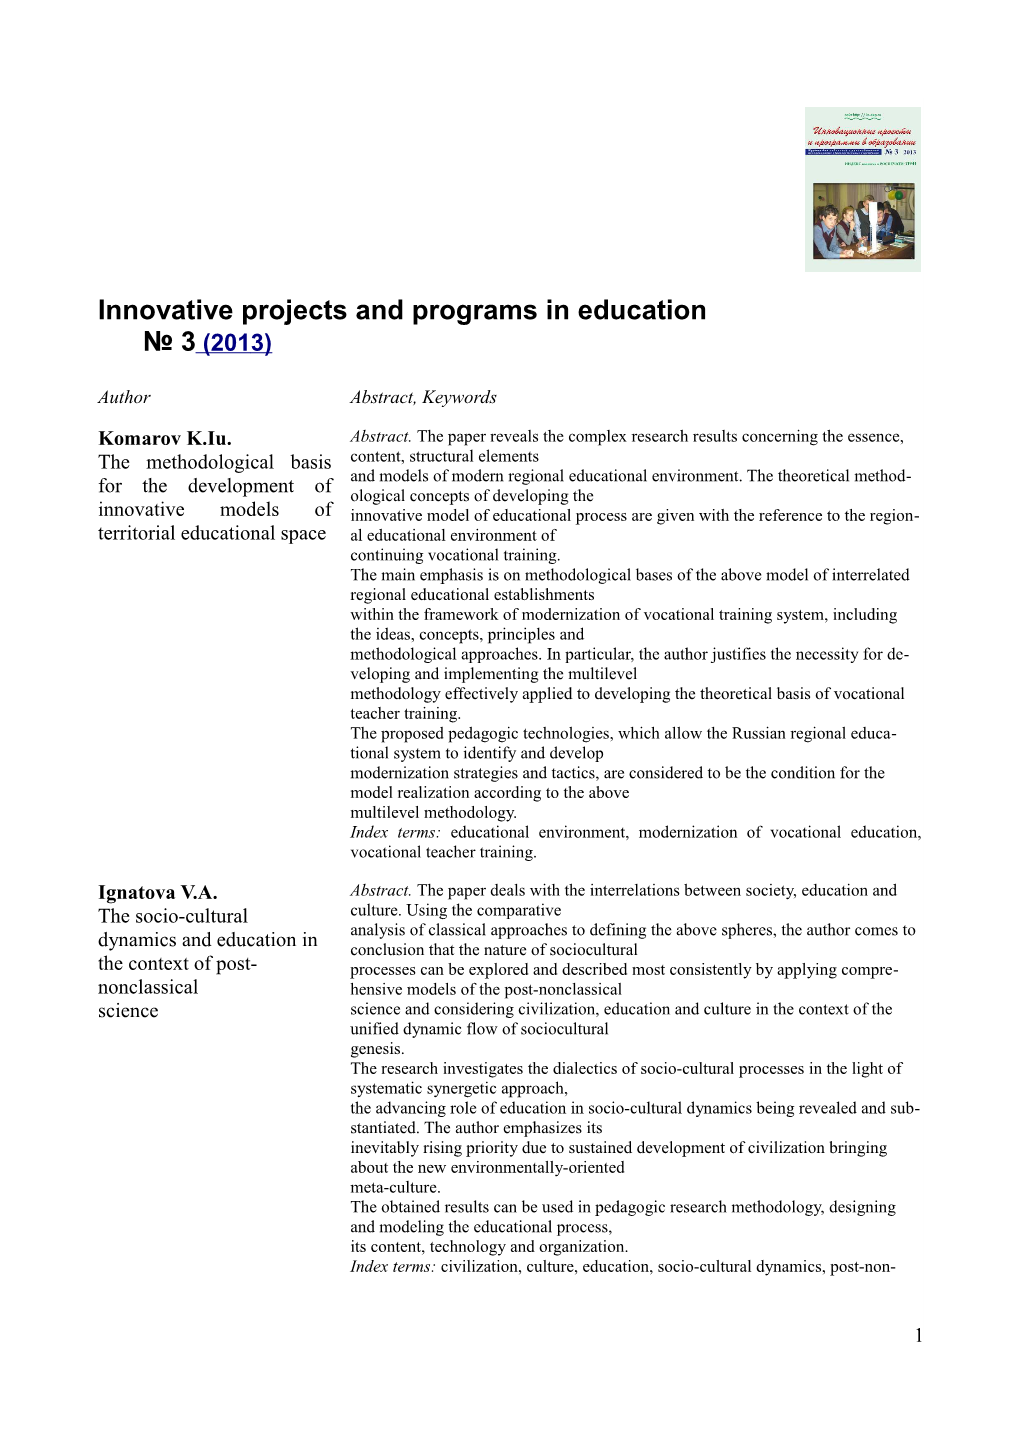 Innovative Projects and Programs in Education 3 (2013)